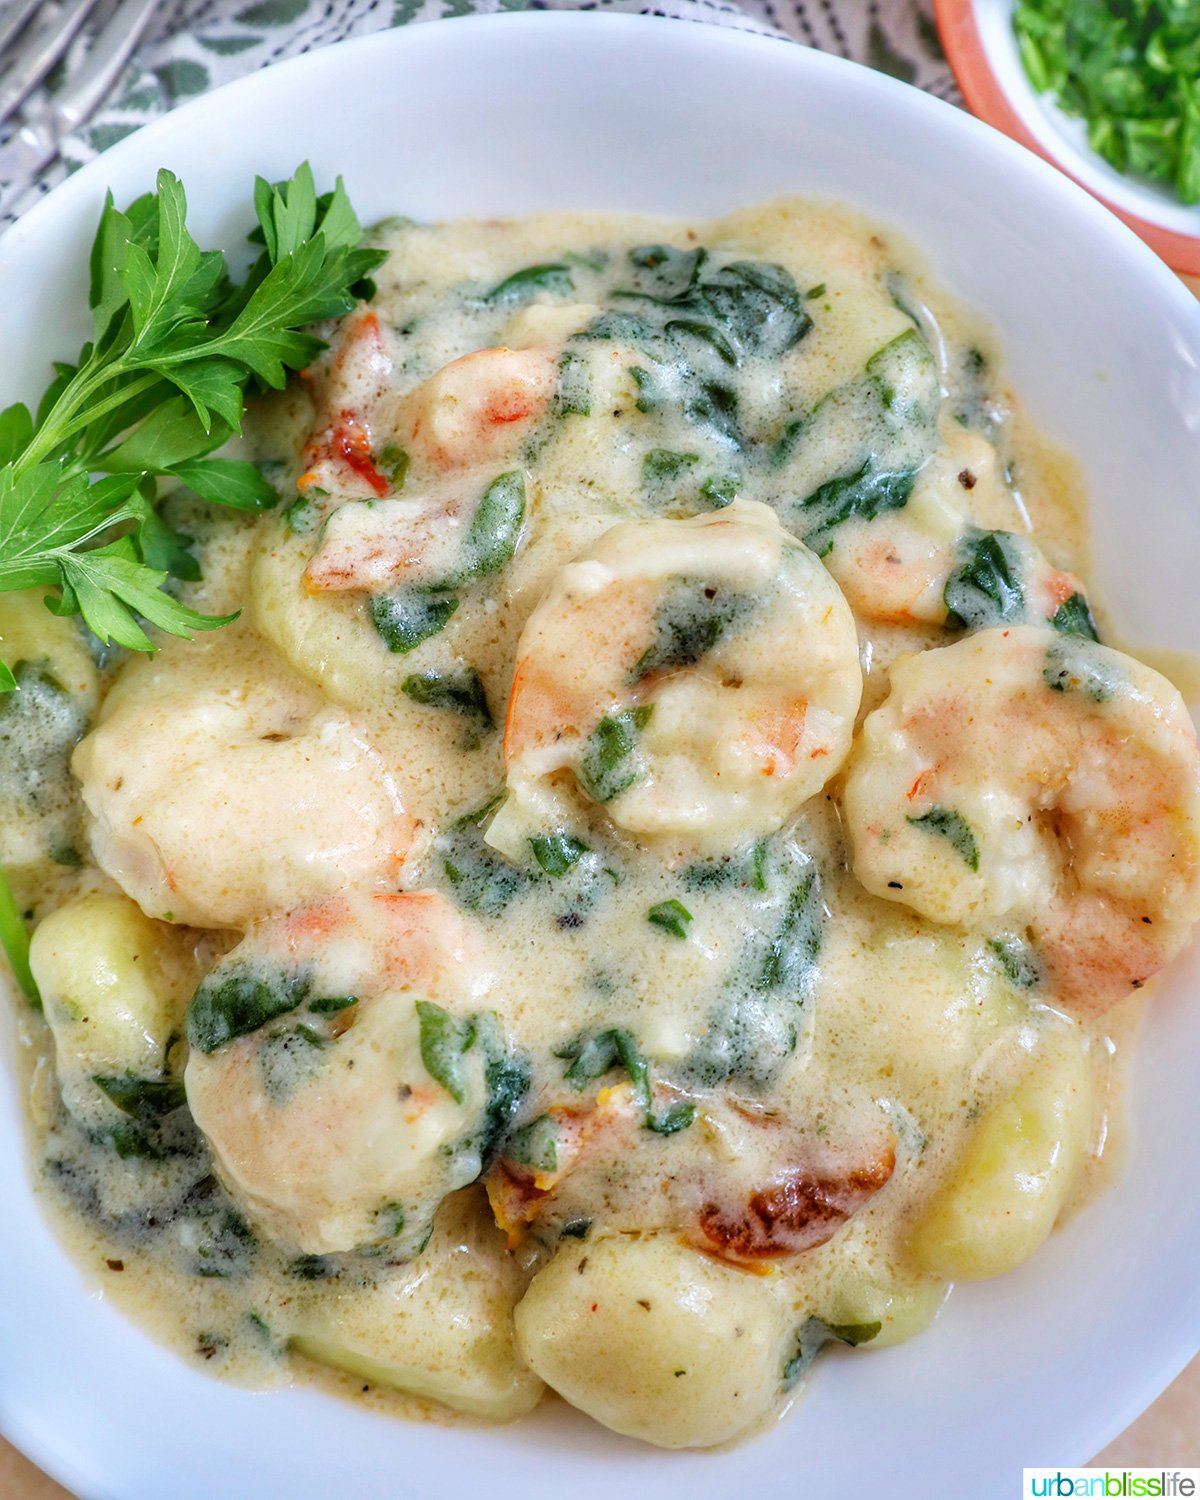 Tuscan Shrimp Gnocchi in a white bowl with garnish of parsley leaves.